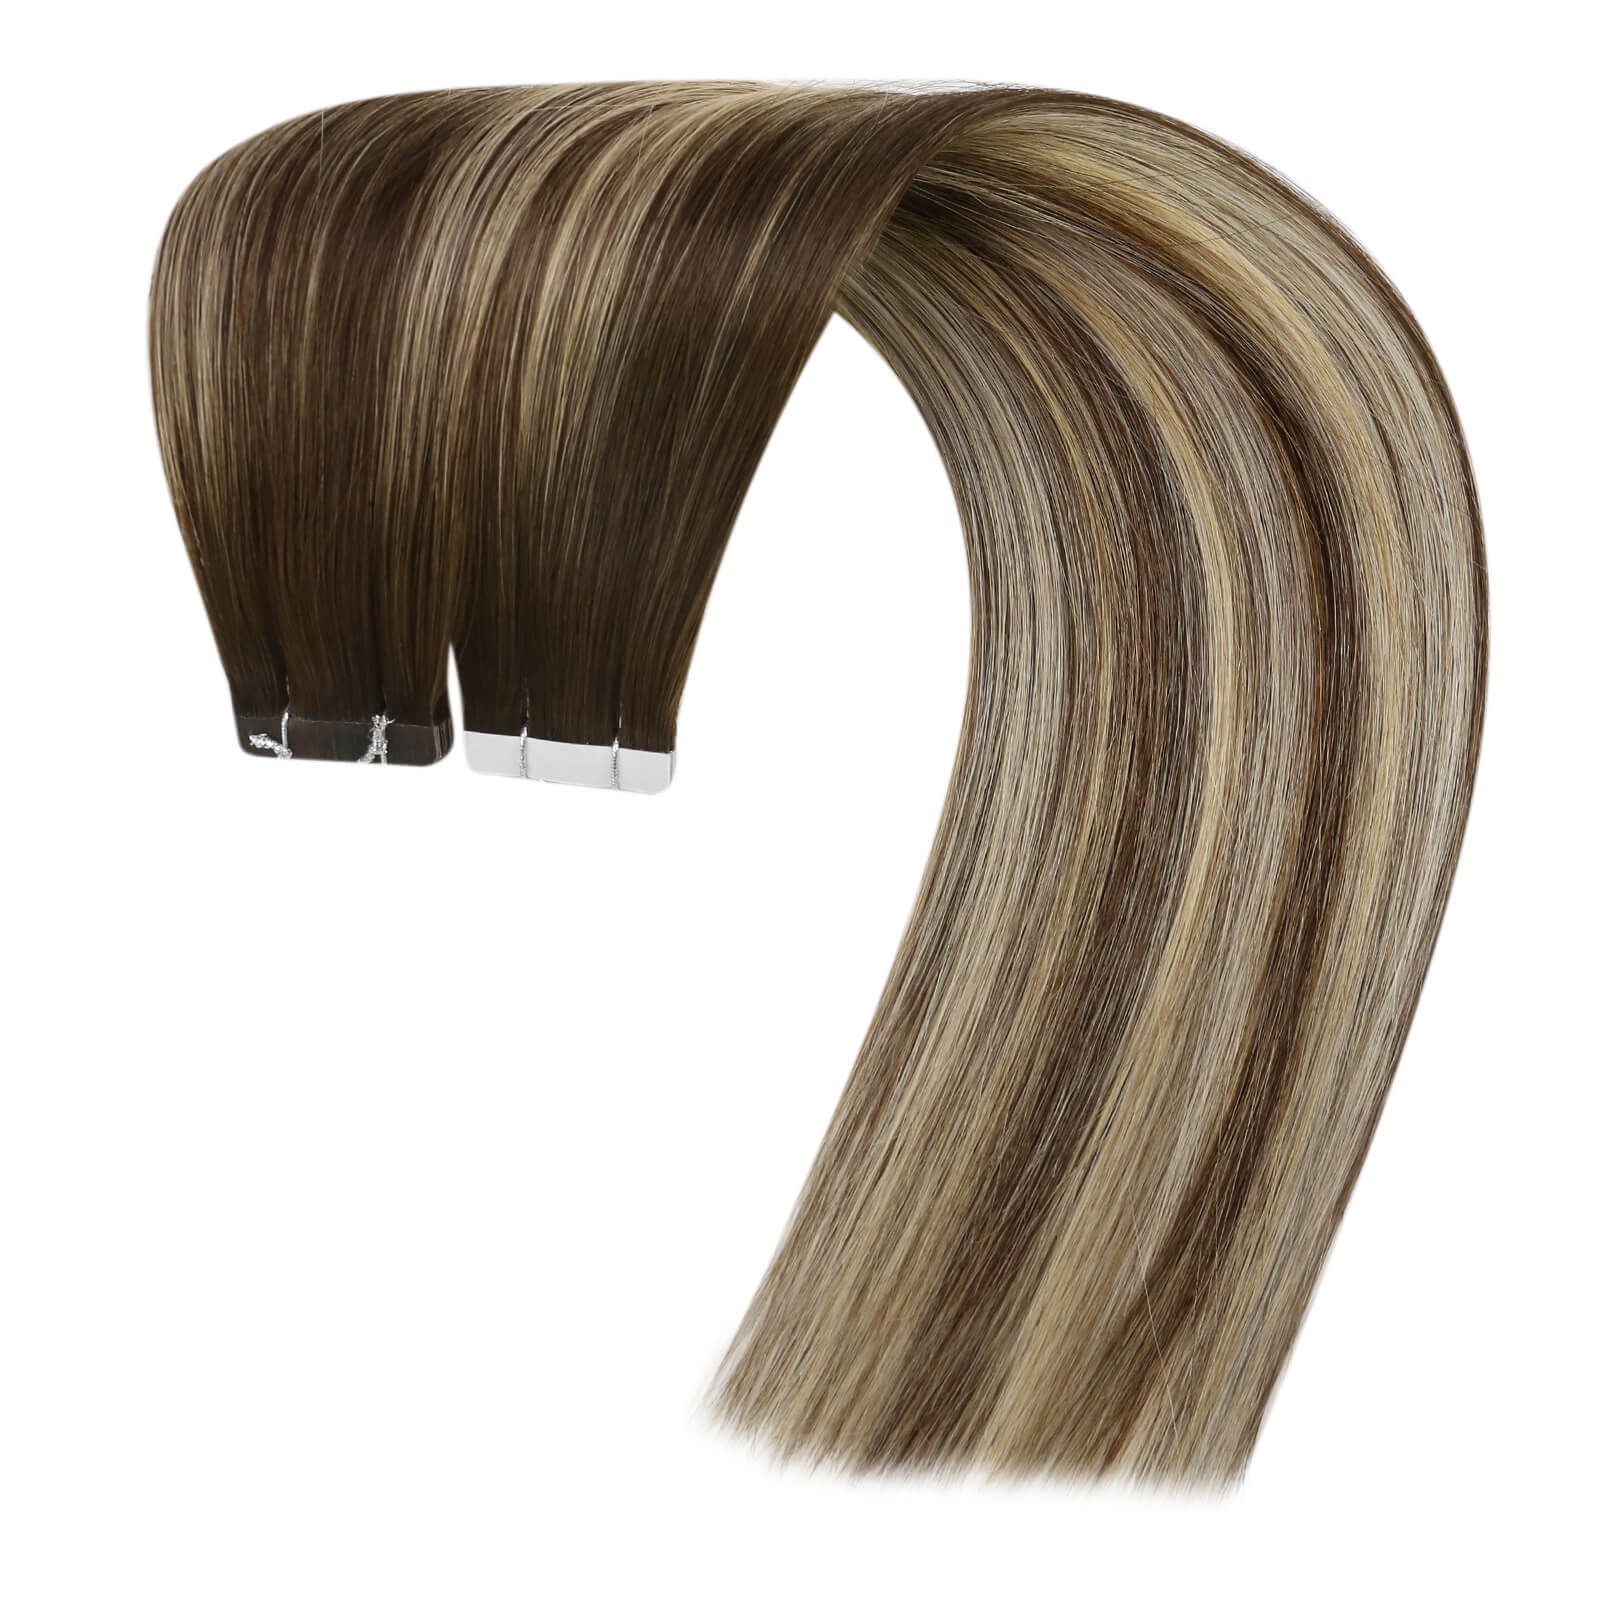 sunny hair in tape extensions, blonde tape in extensions, best quality virgin tape in hair extensions, high quality, natural tape ins